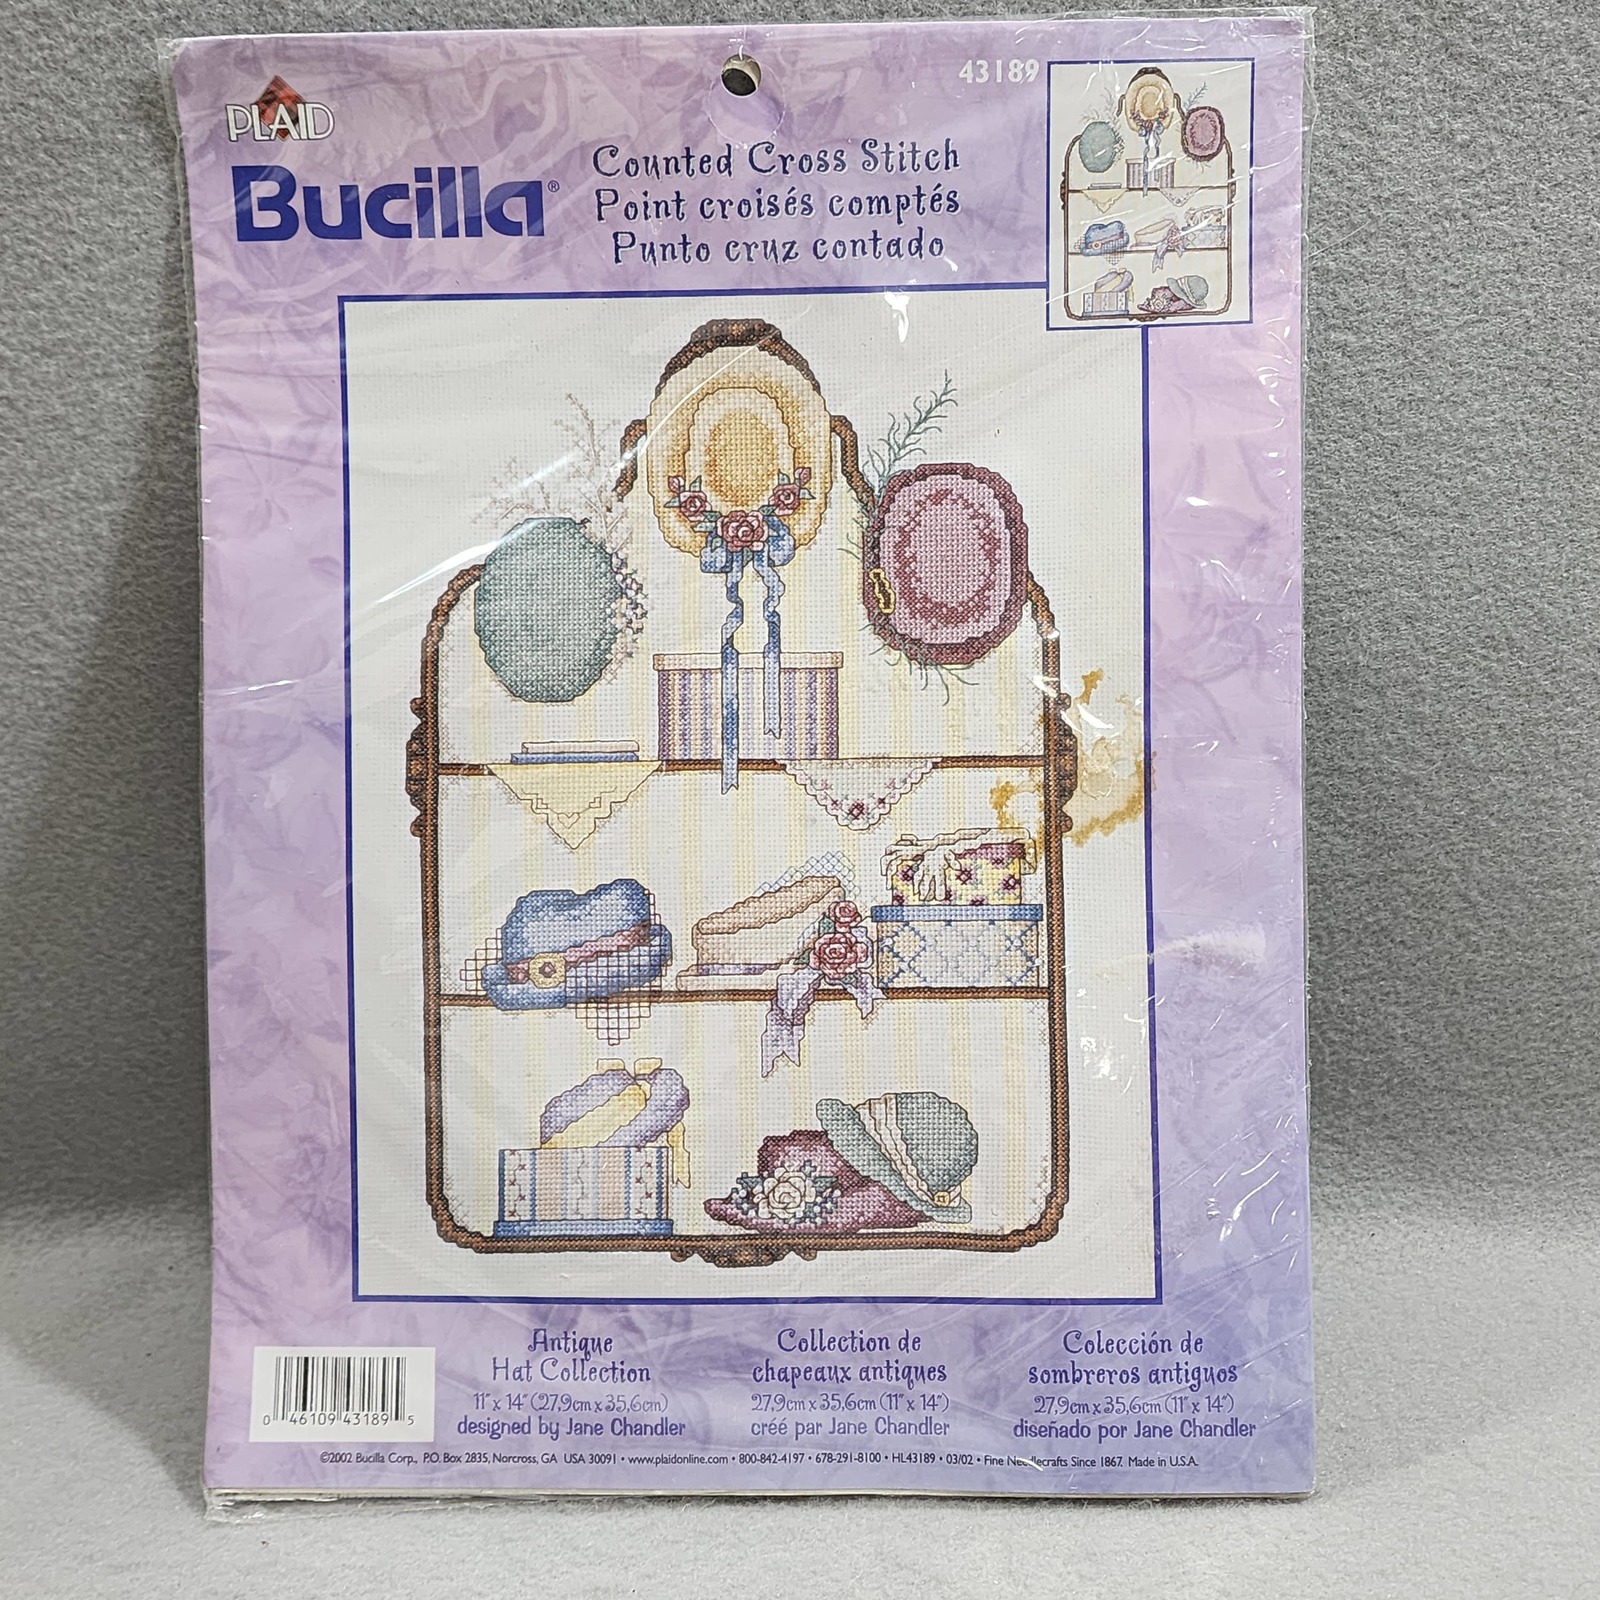 BUCILLA ANTIQUE HAT COLLECTION Counted Cross Stitch Kit 11x14 Pearl Bead 43189   - $14.94